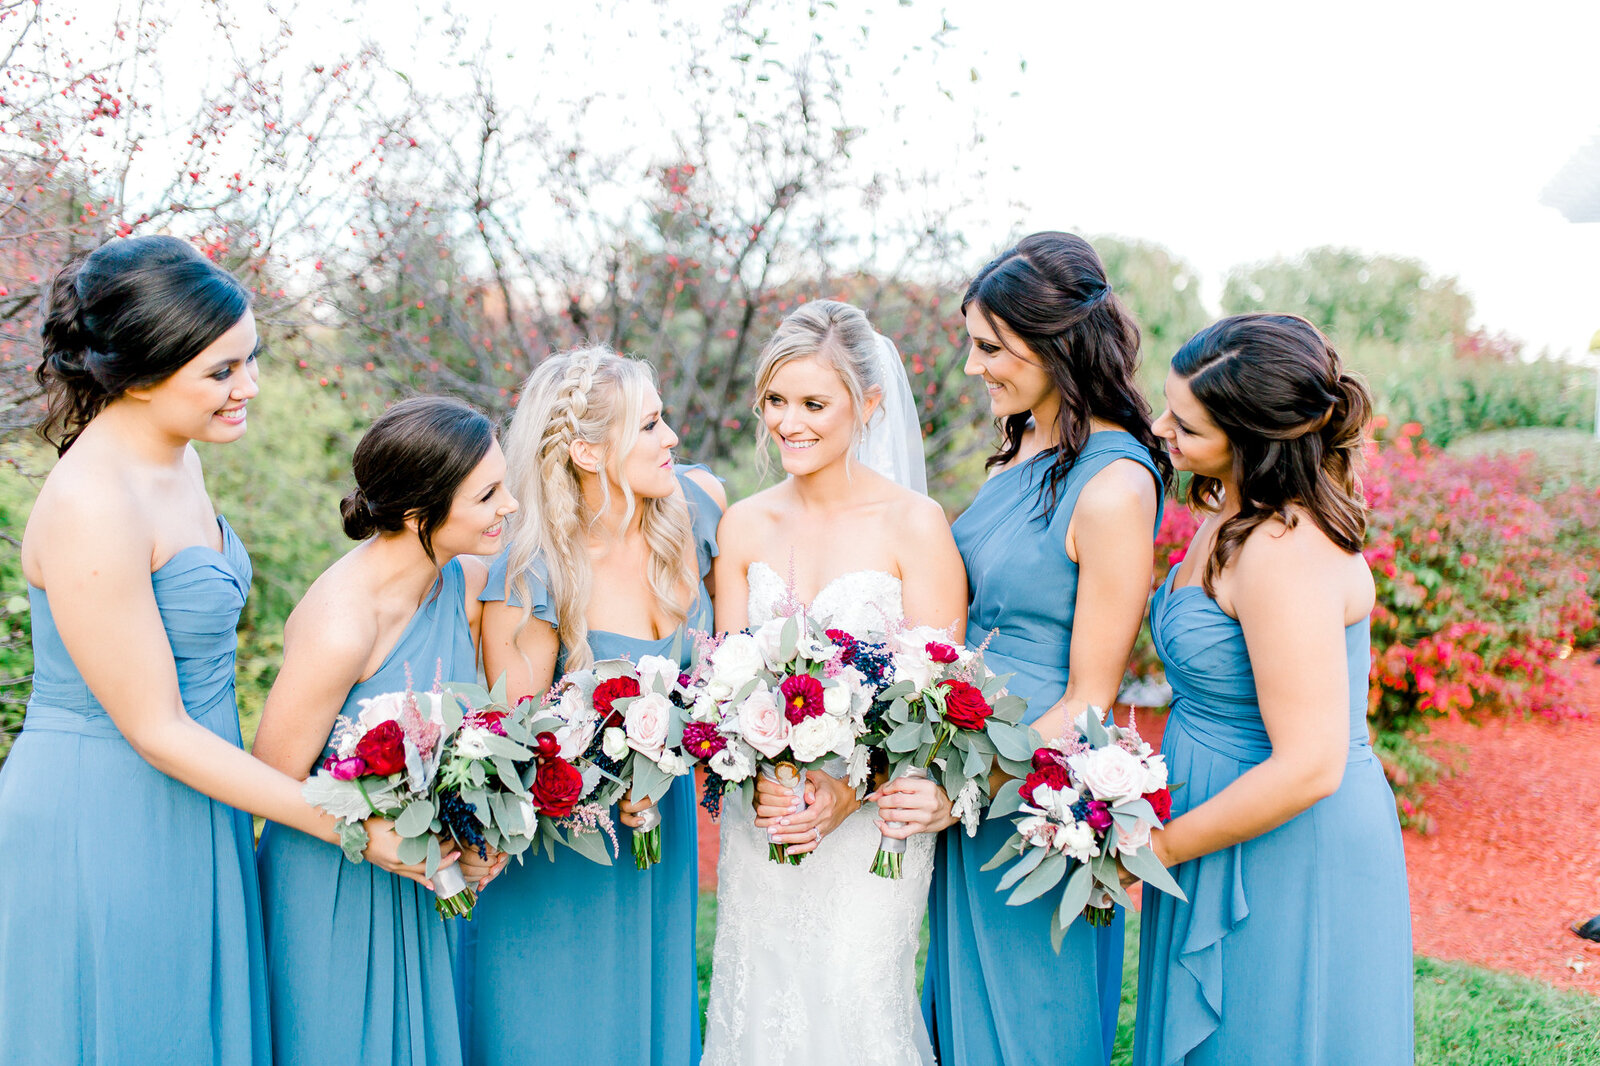 royal blue bridesmaids dreses inspiration wedding photography by local chicago wedding photographer bozena voytko, wedding photographers, best chicago wedding photographer, chicago Il wedding photographer